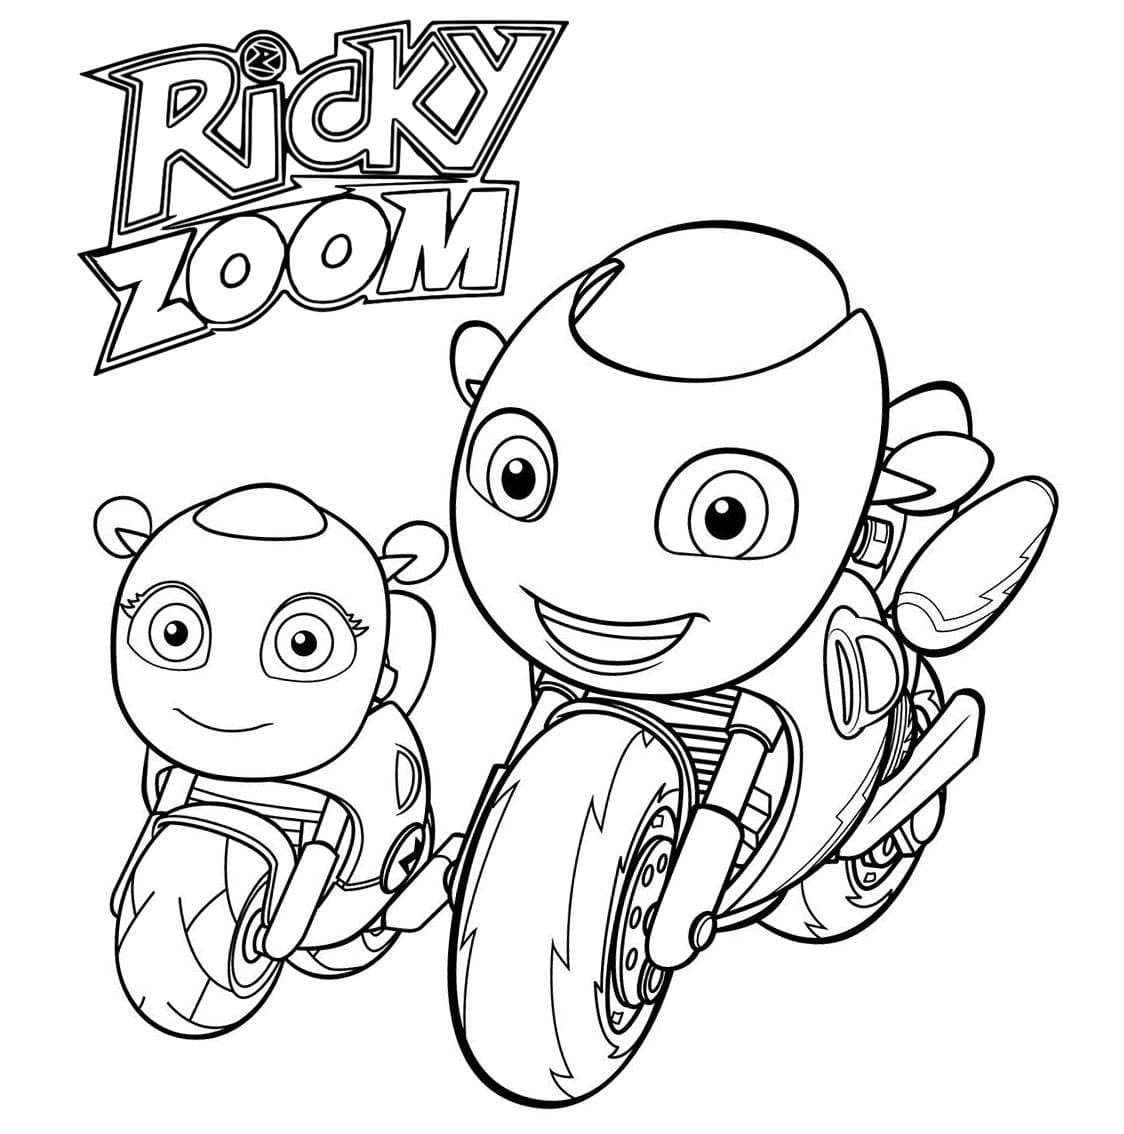 Ricky Zoom Coloring Page - Kids N Fun Com 11 Coloring Pages Of Ricky